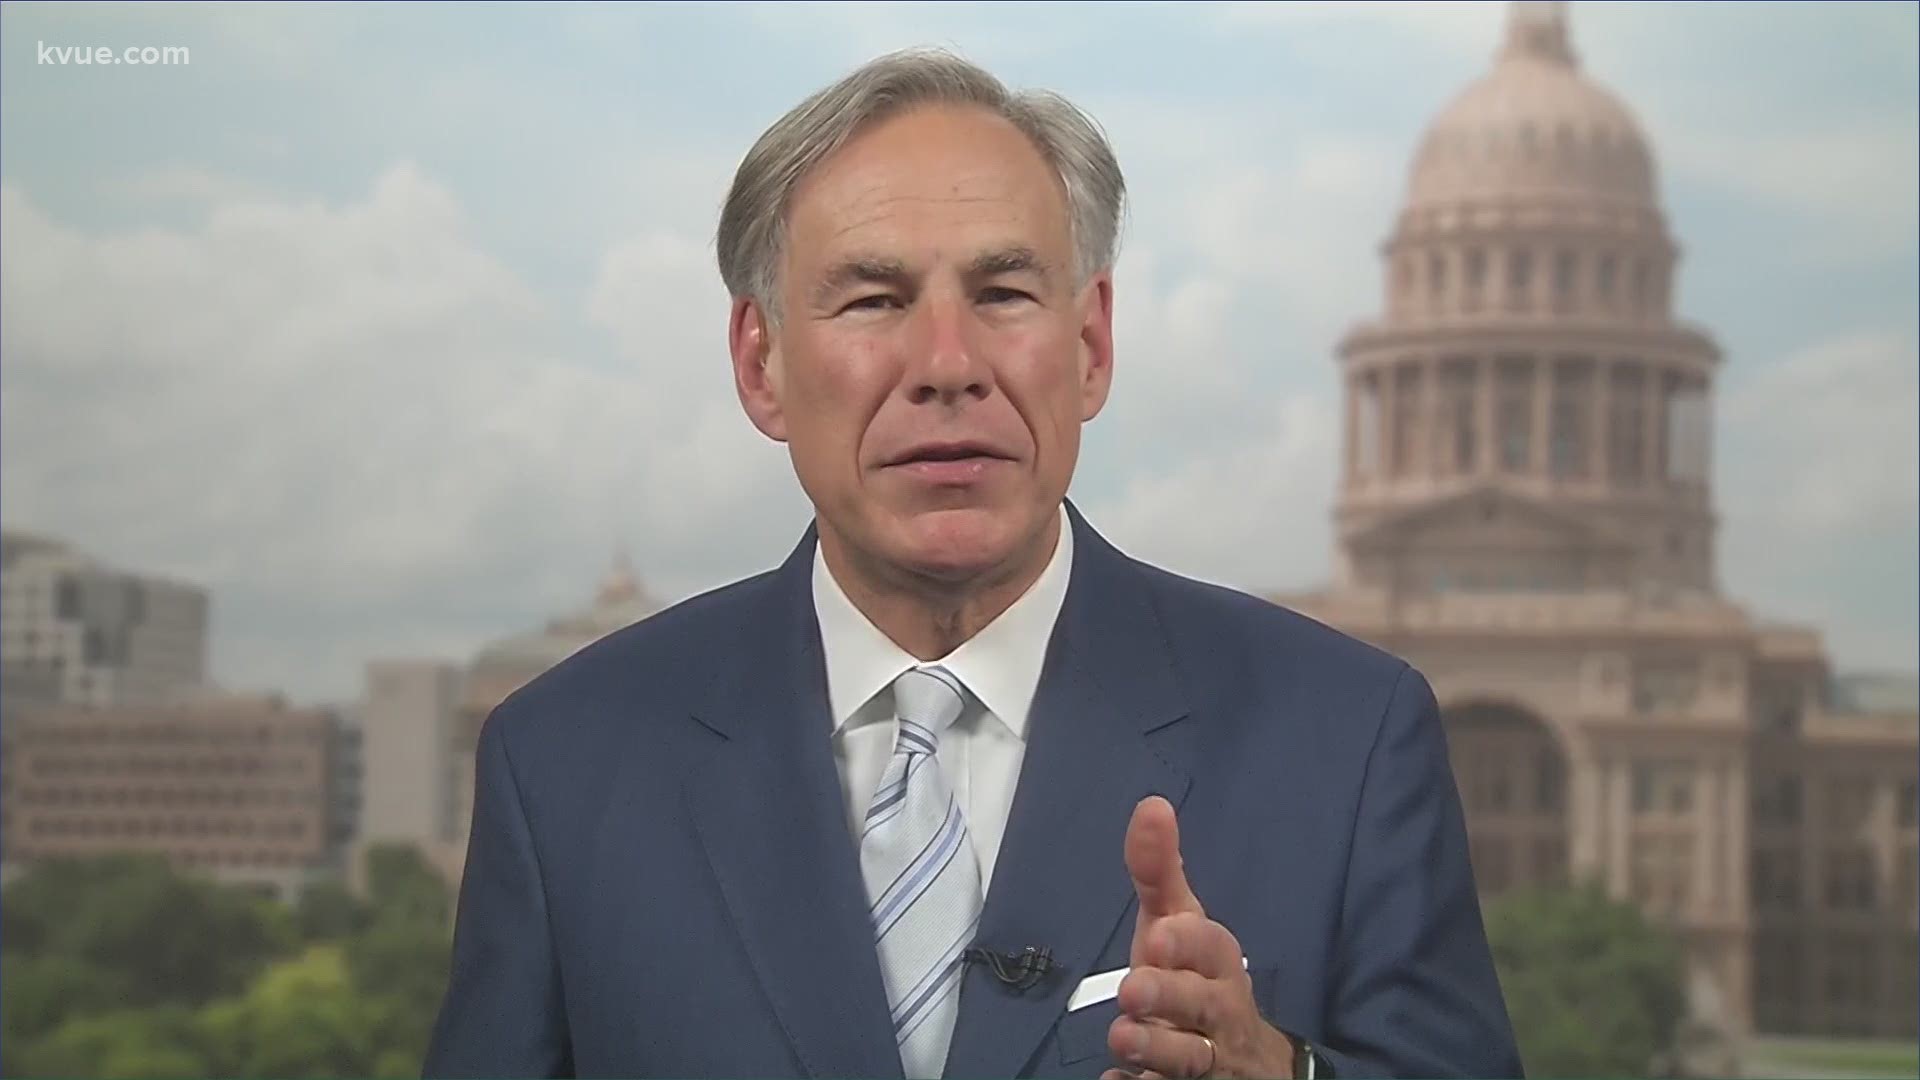 Gov. Greg Abbott spoke with KVUE's Ashley Goudeau about phase two of reopening the state.